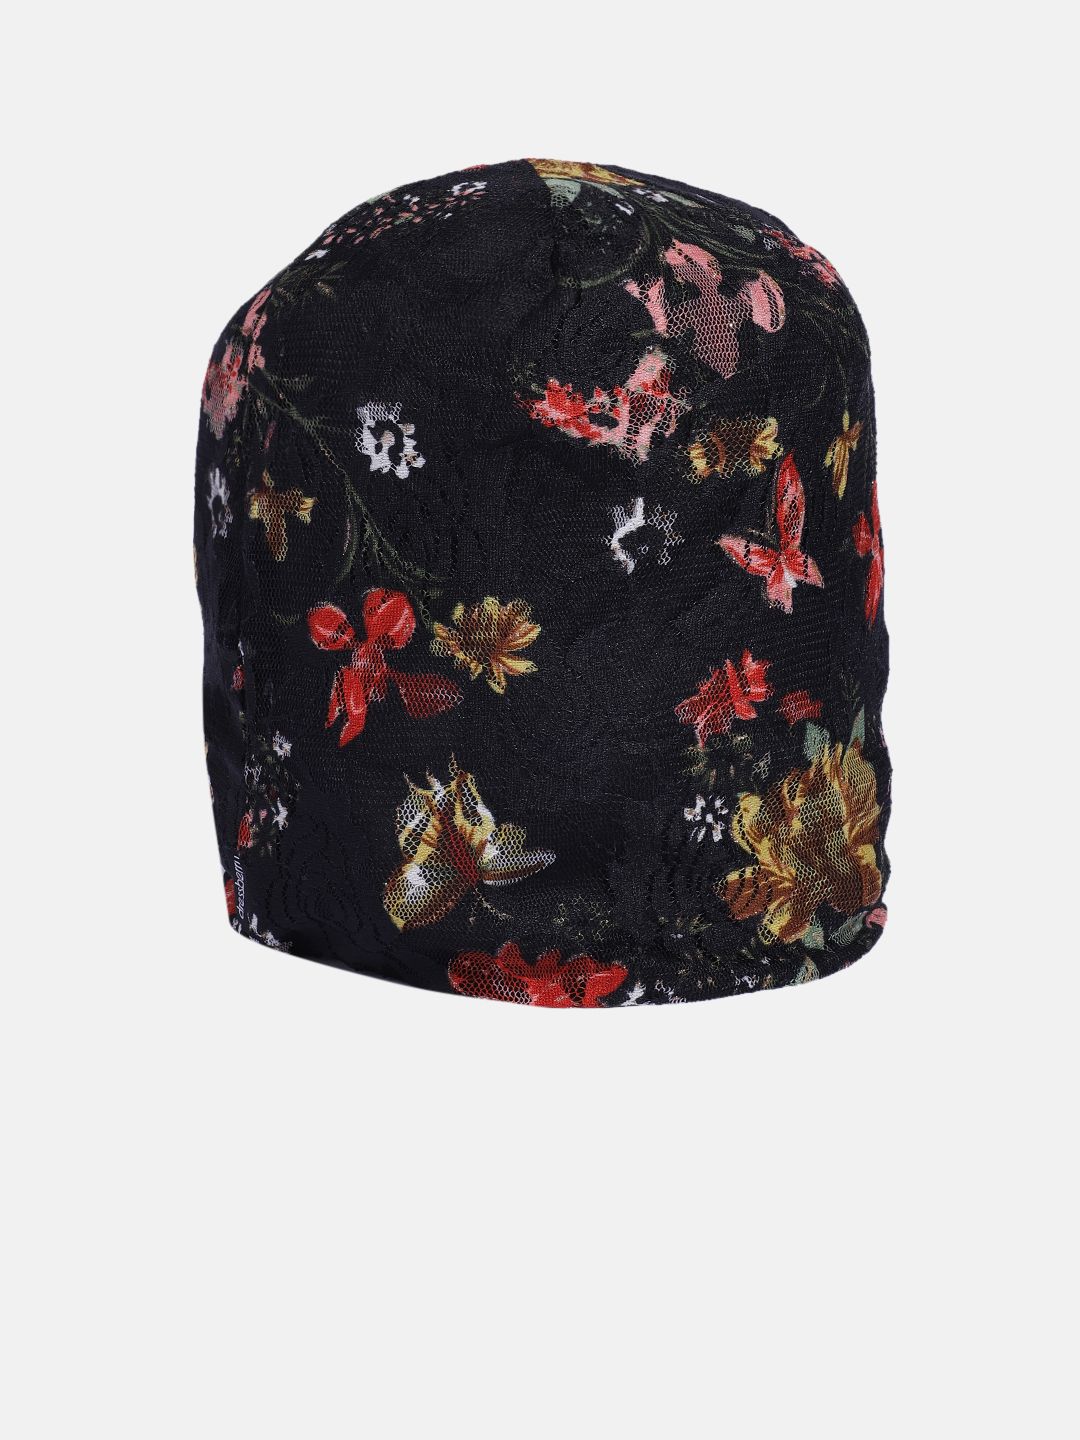 DressBerry Women Black & Red Floral Lace Beanie Price in India